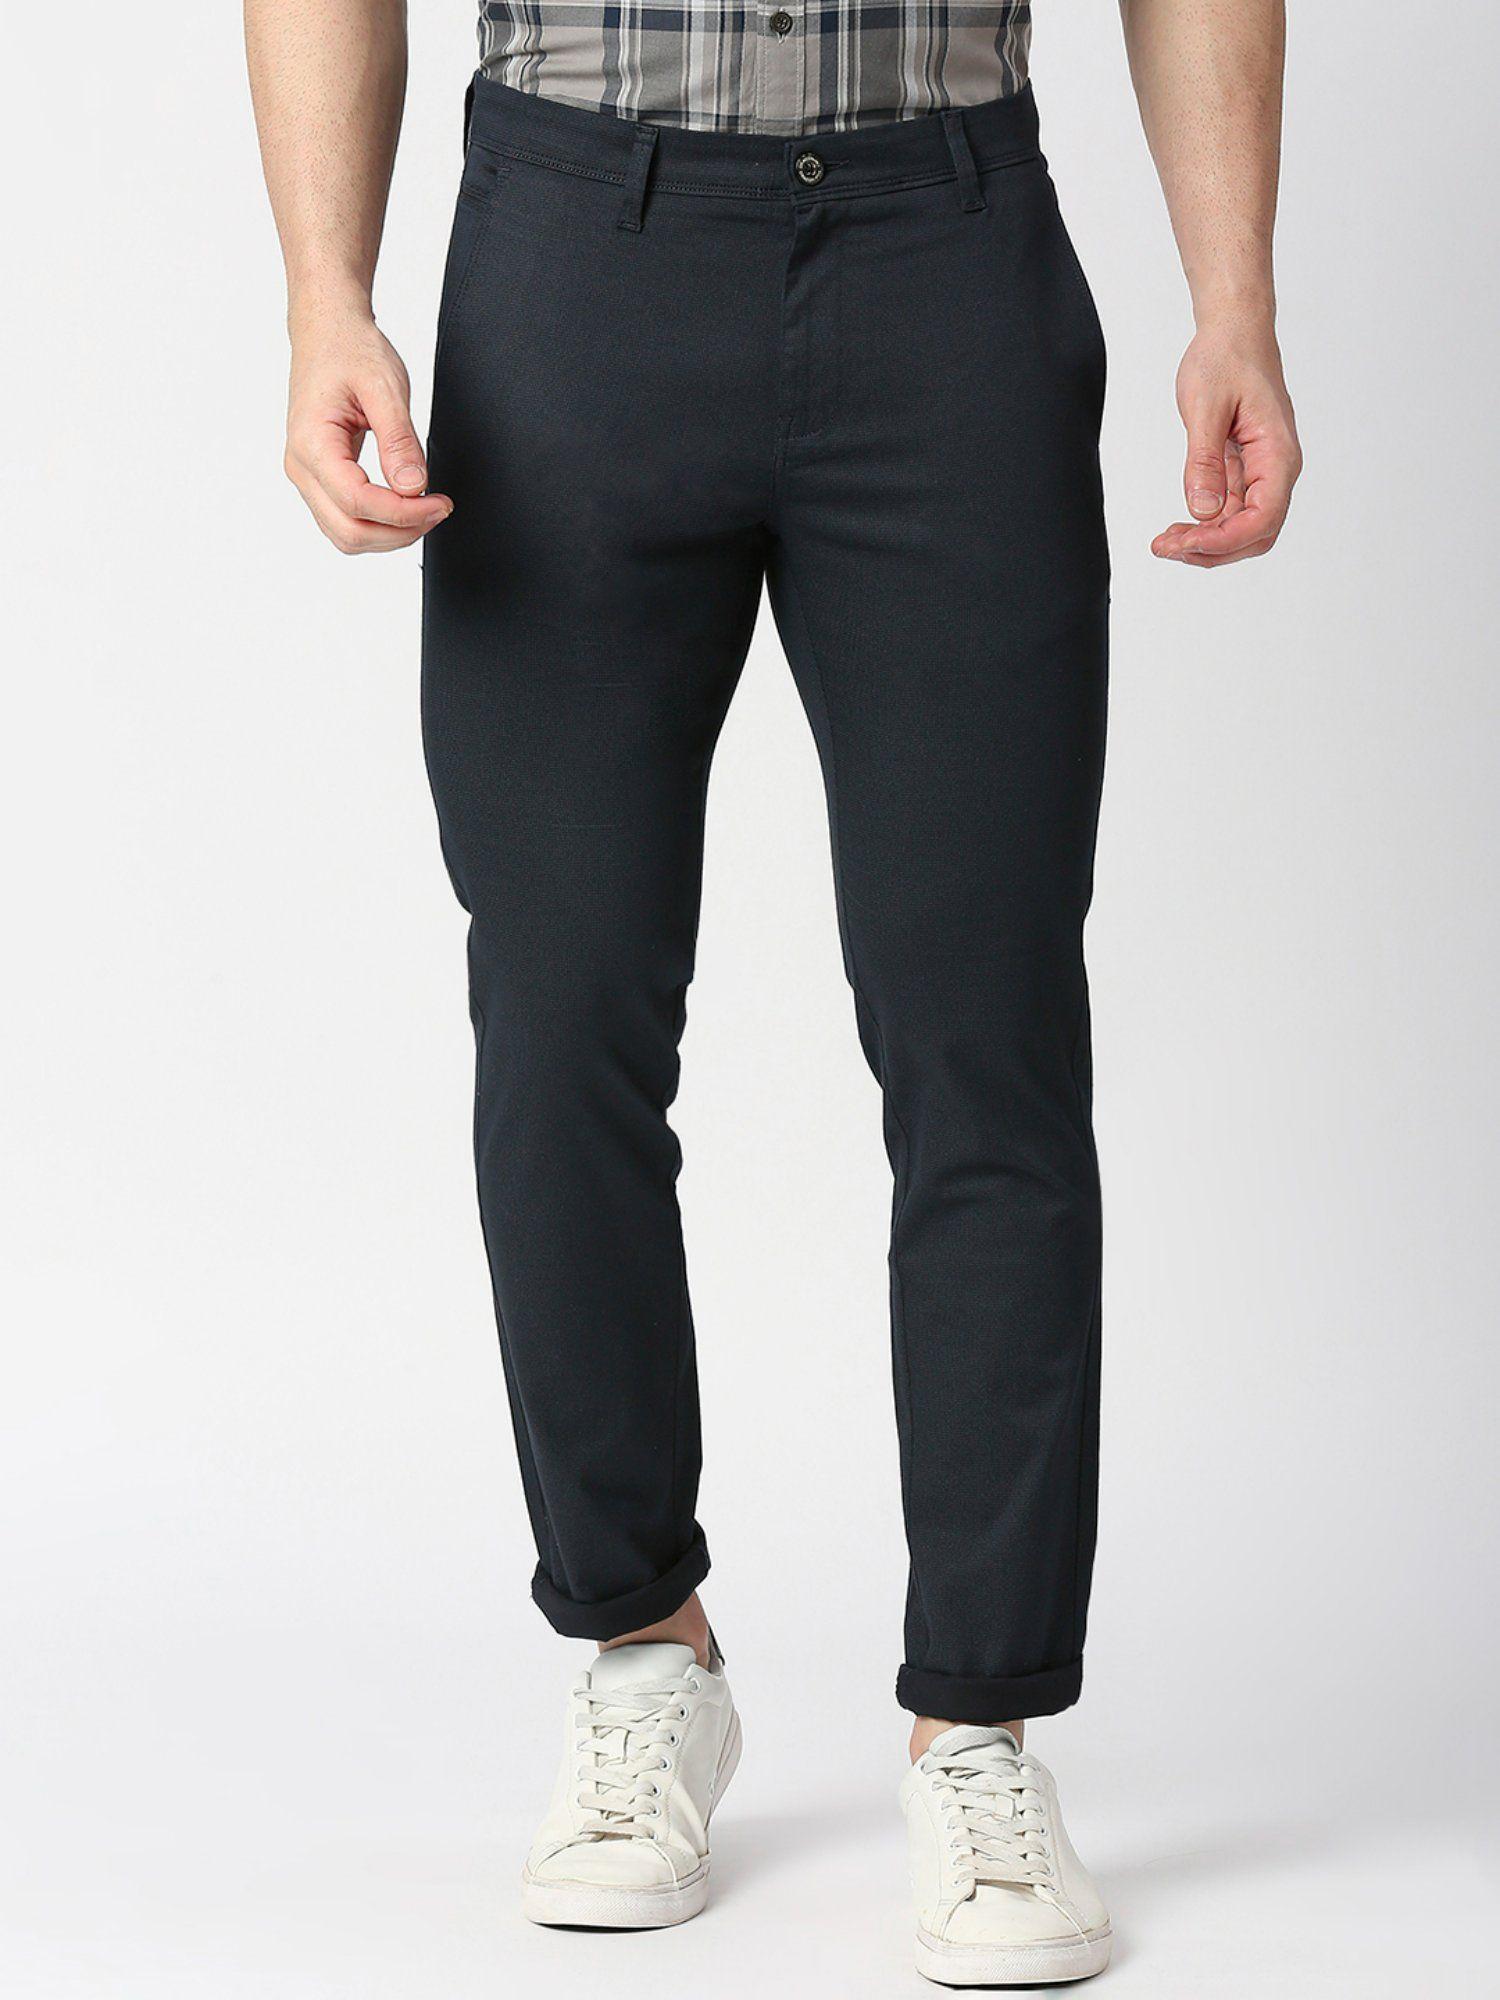 navy-slim-tapered-cotton-stretch-trouser